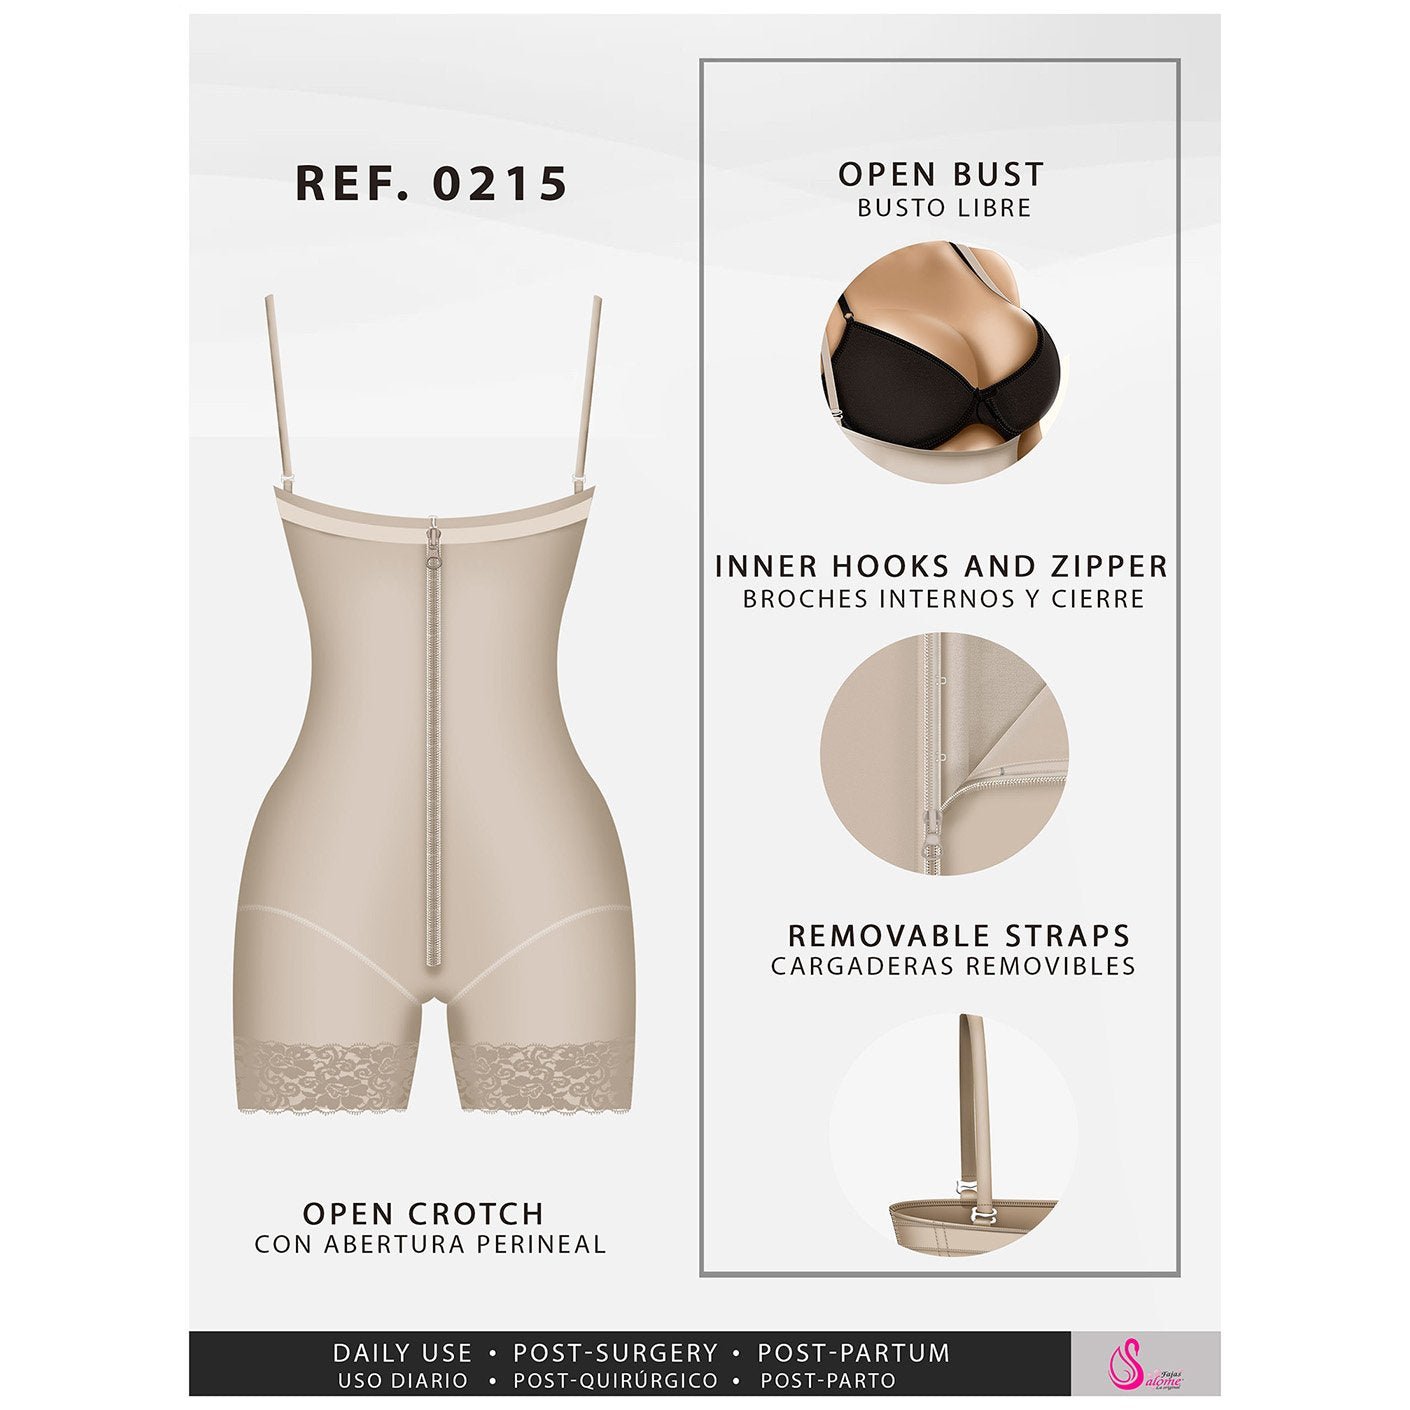 Royal's slim, postpartum shapewear with open crotch, hooks, and